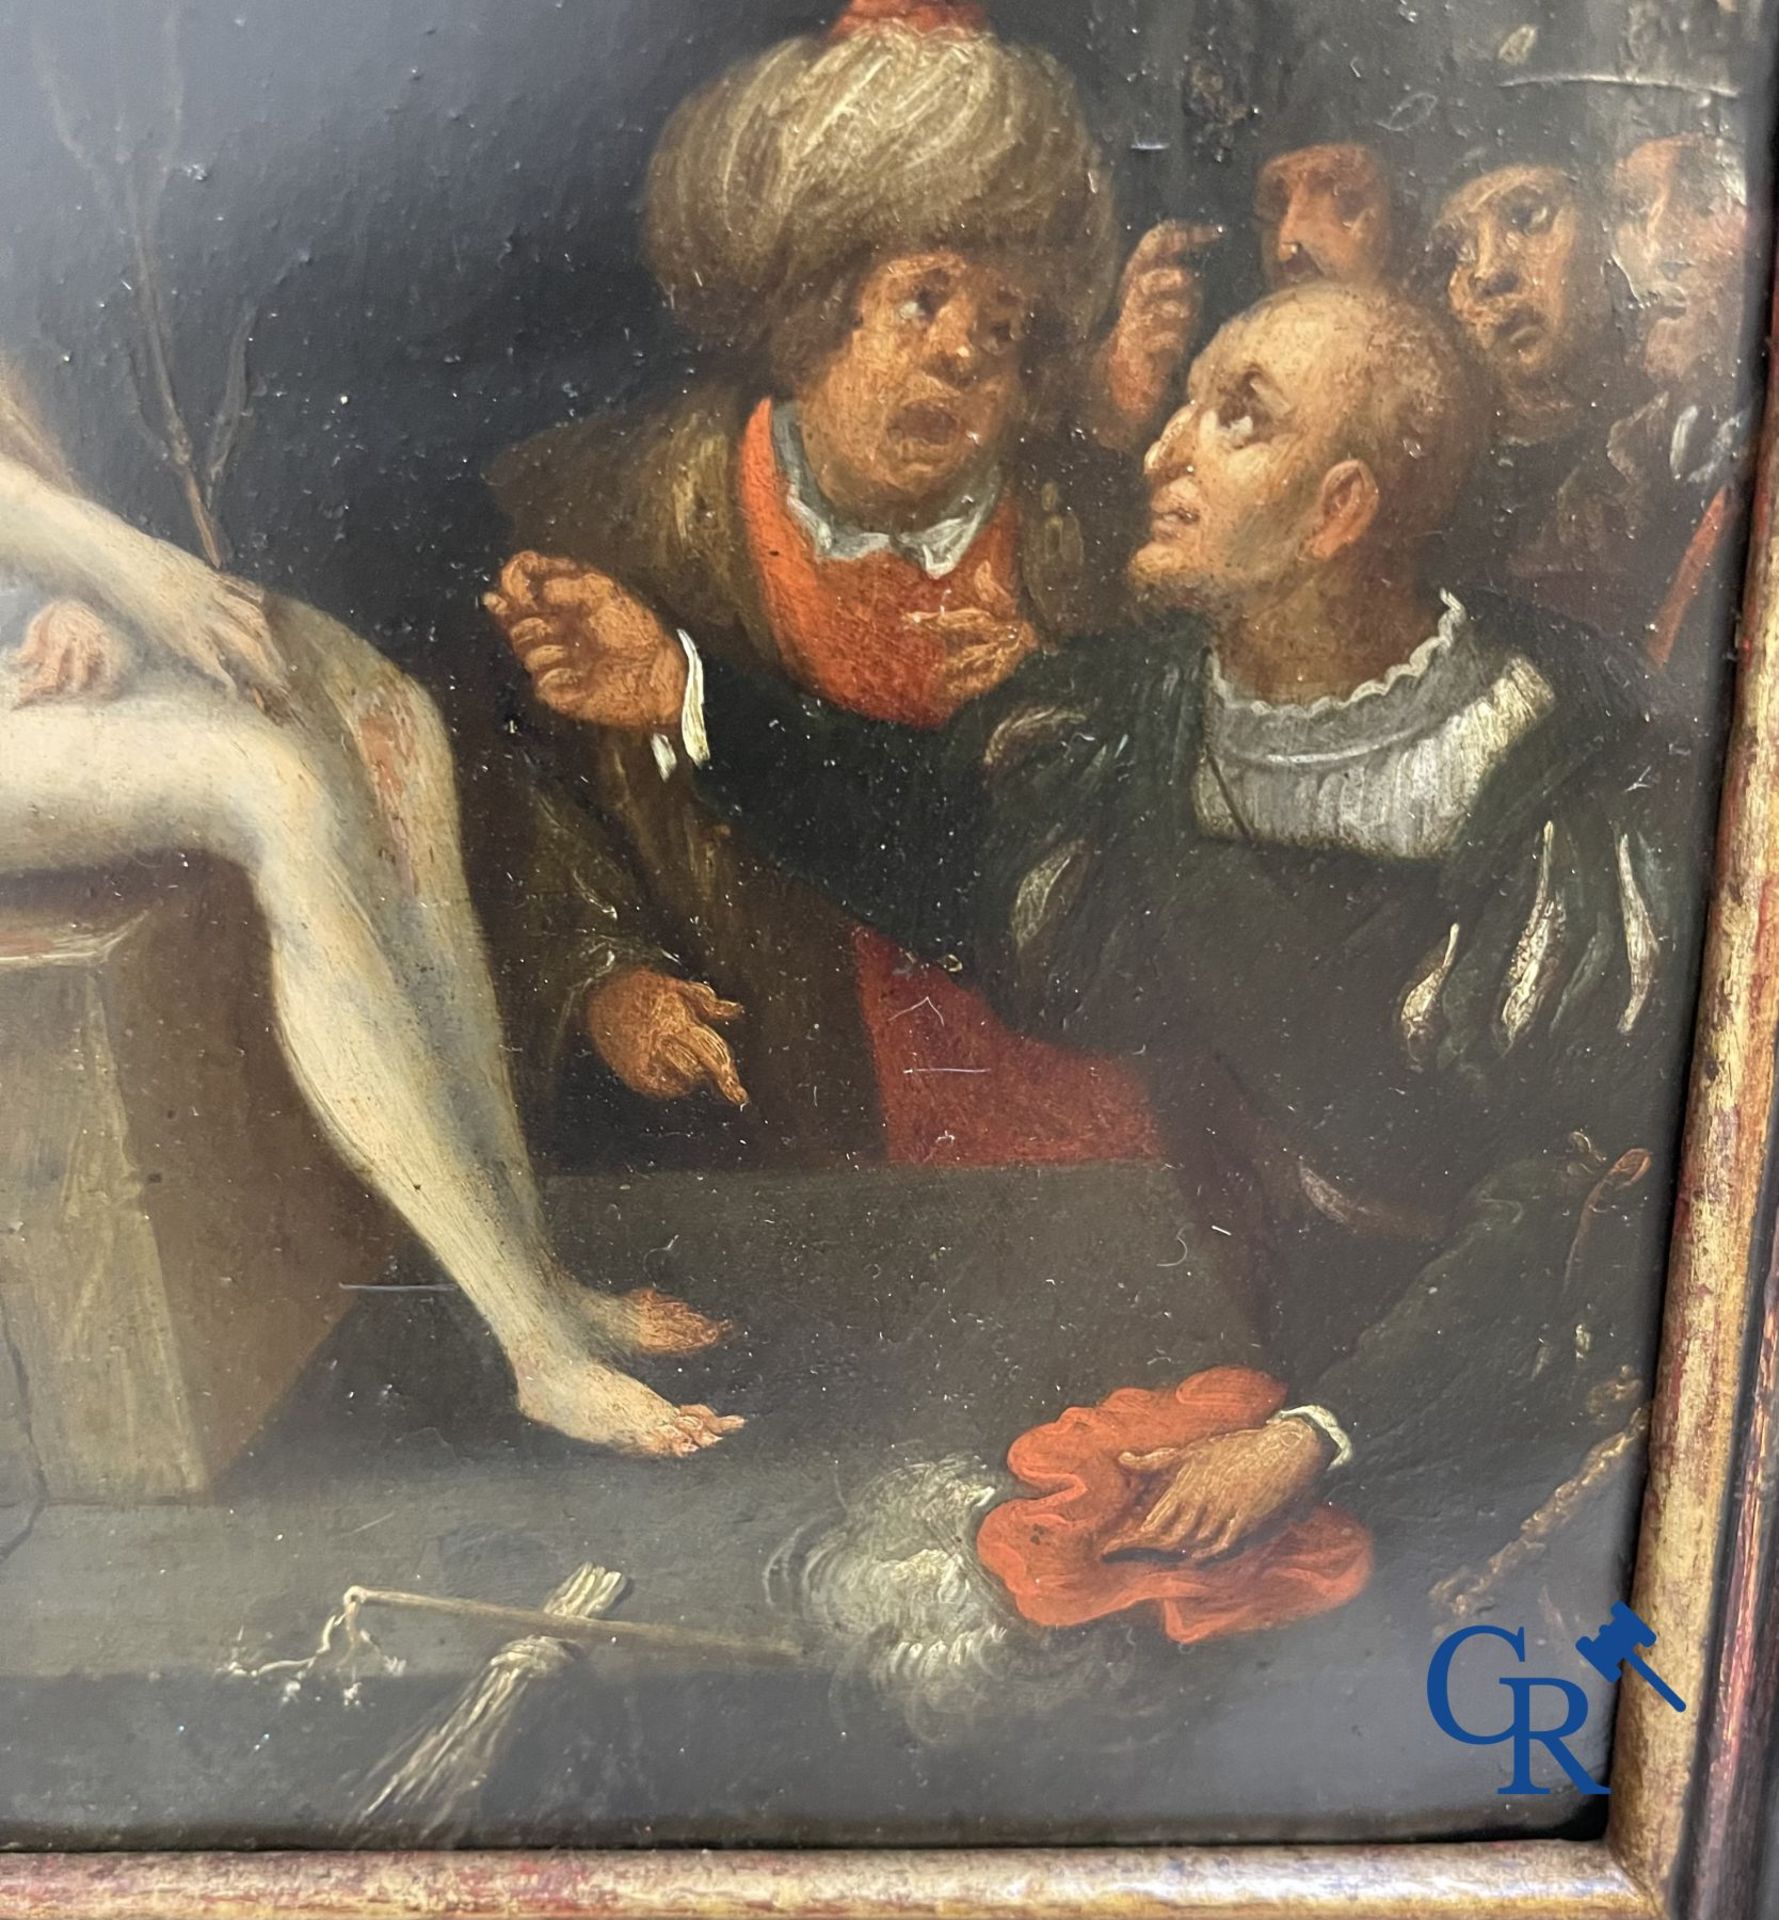 Painting: Antwerp, 16th century. The mockery of Christ. - Image 4 of 11